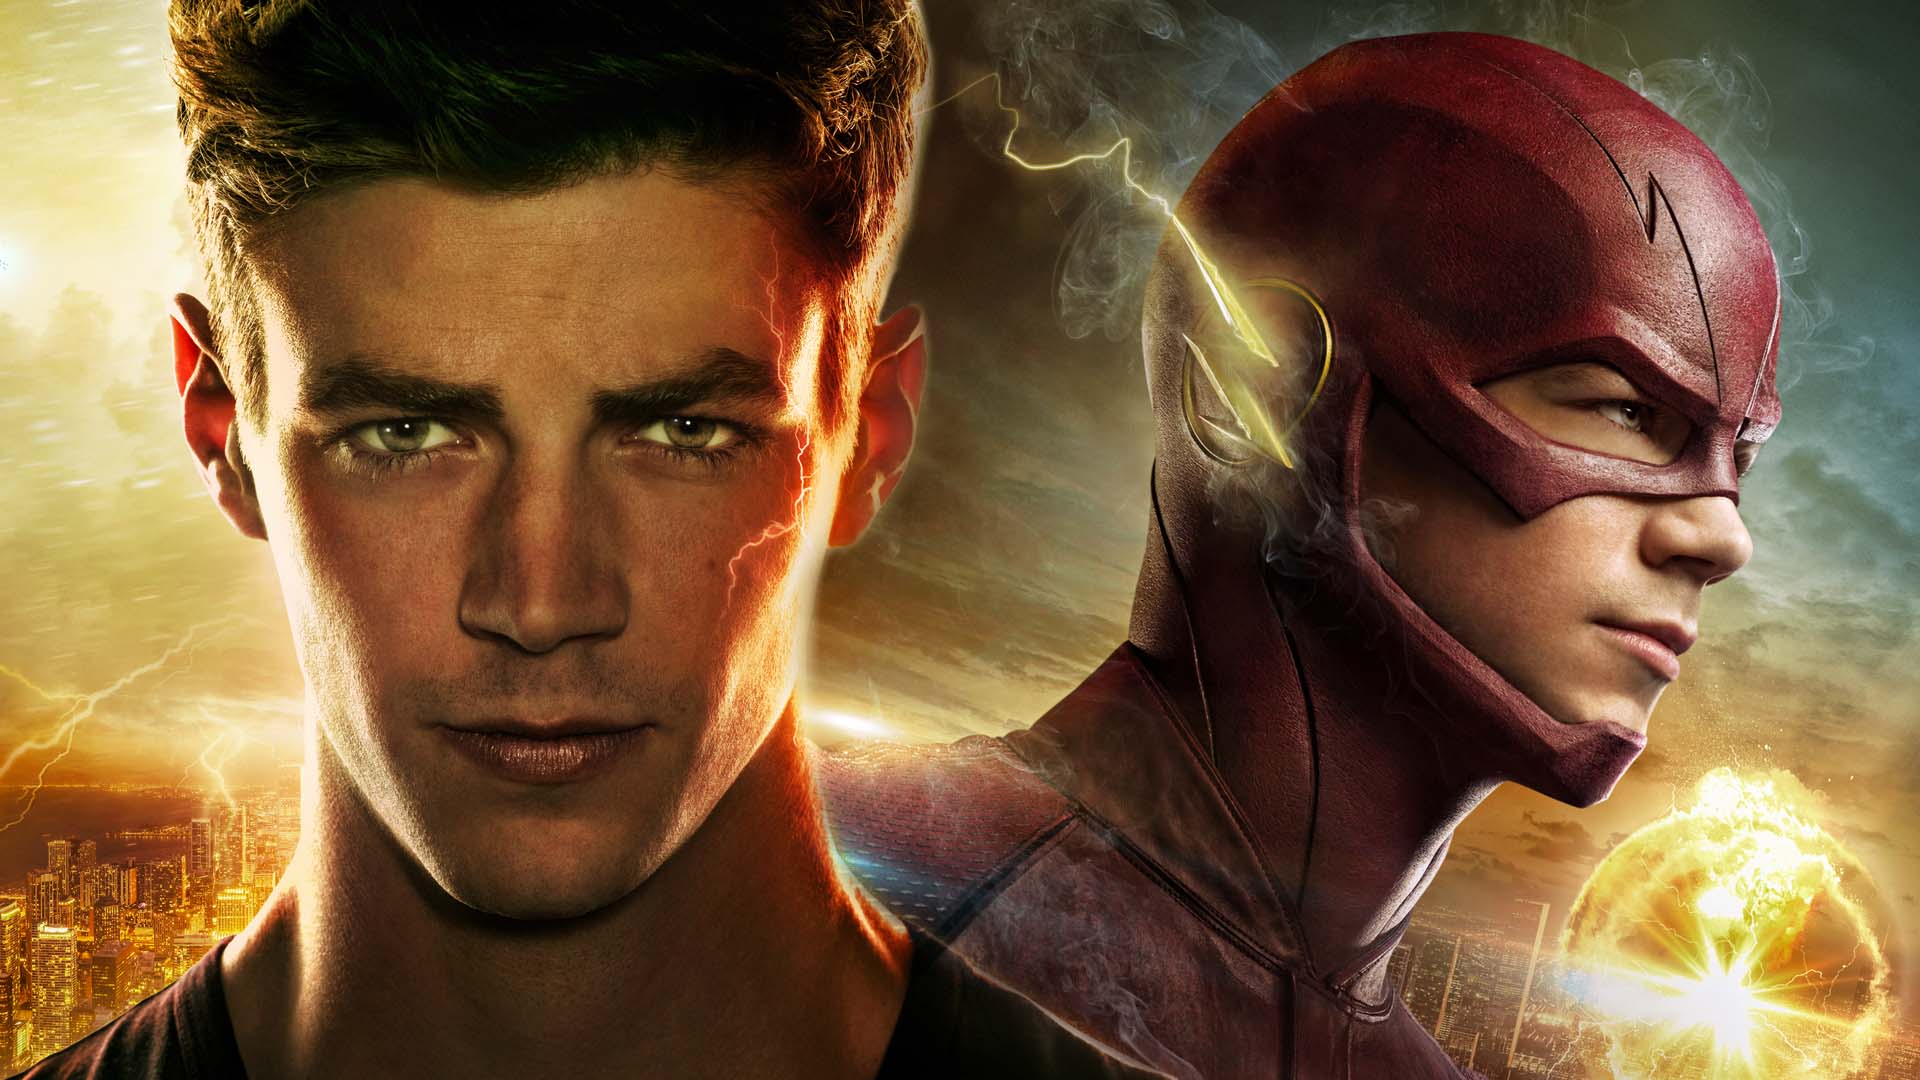 120 The flash wallpapers ideas | flash wallpaper, the flash, flash